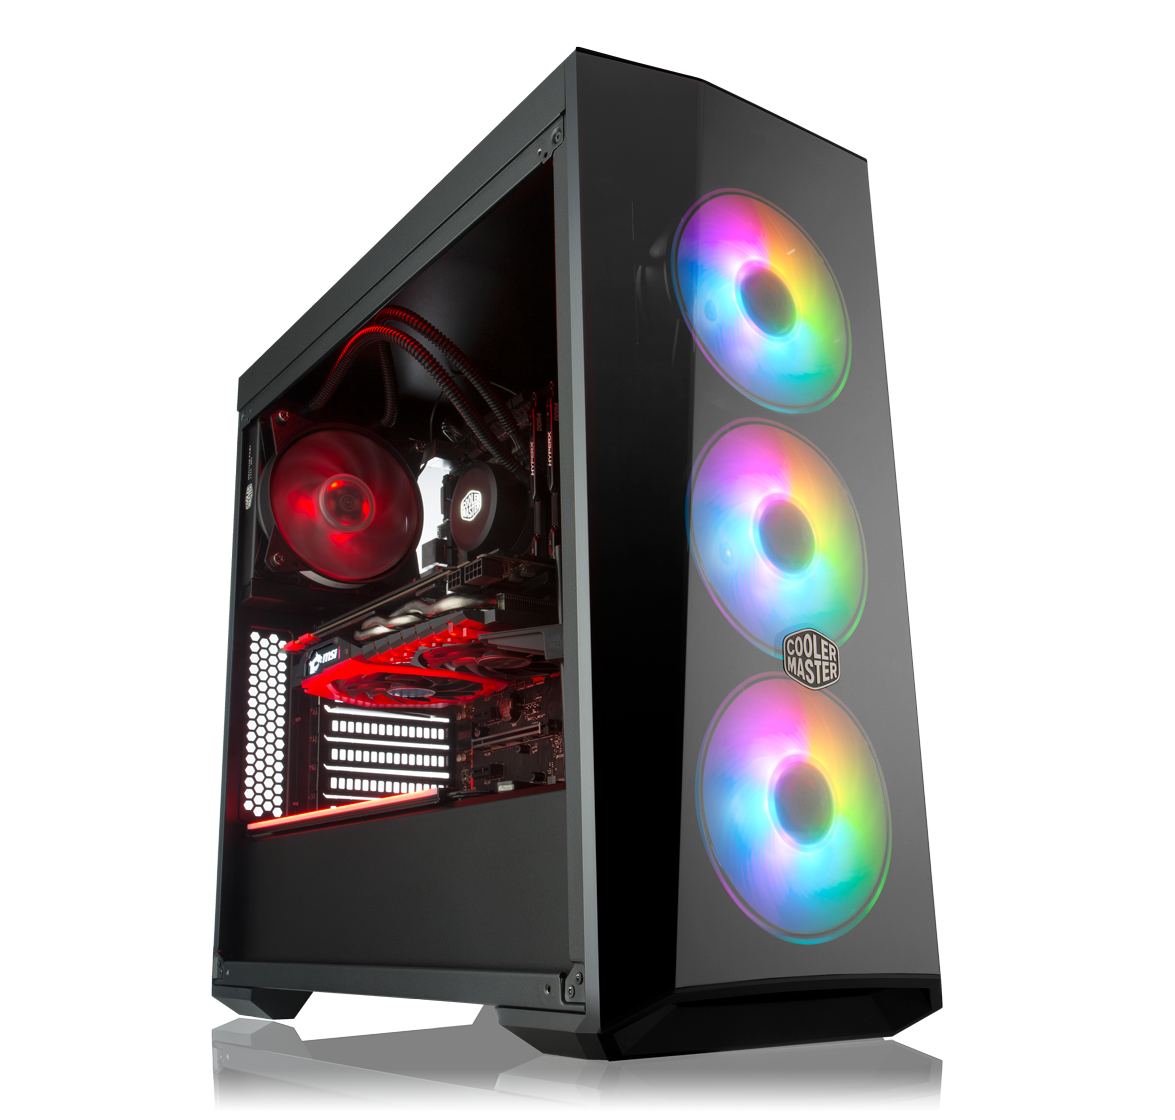 Day Grave Thoroughly MasterBox Lite 5 ARGB Mid Tower PC Case | Cooler Master